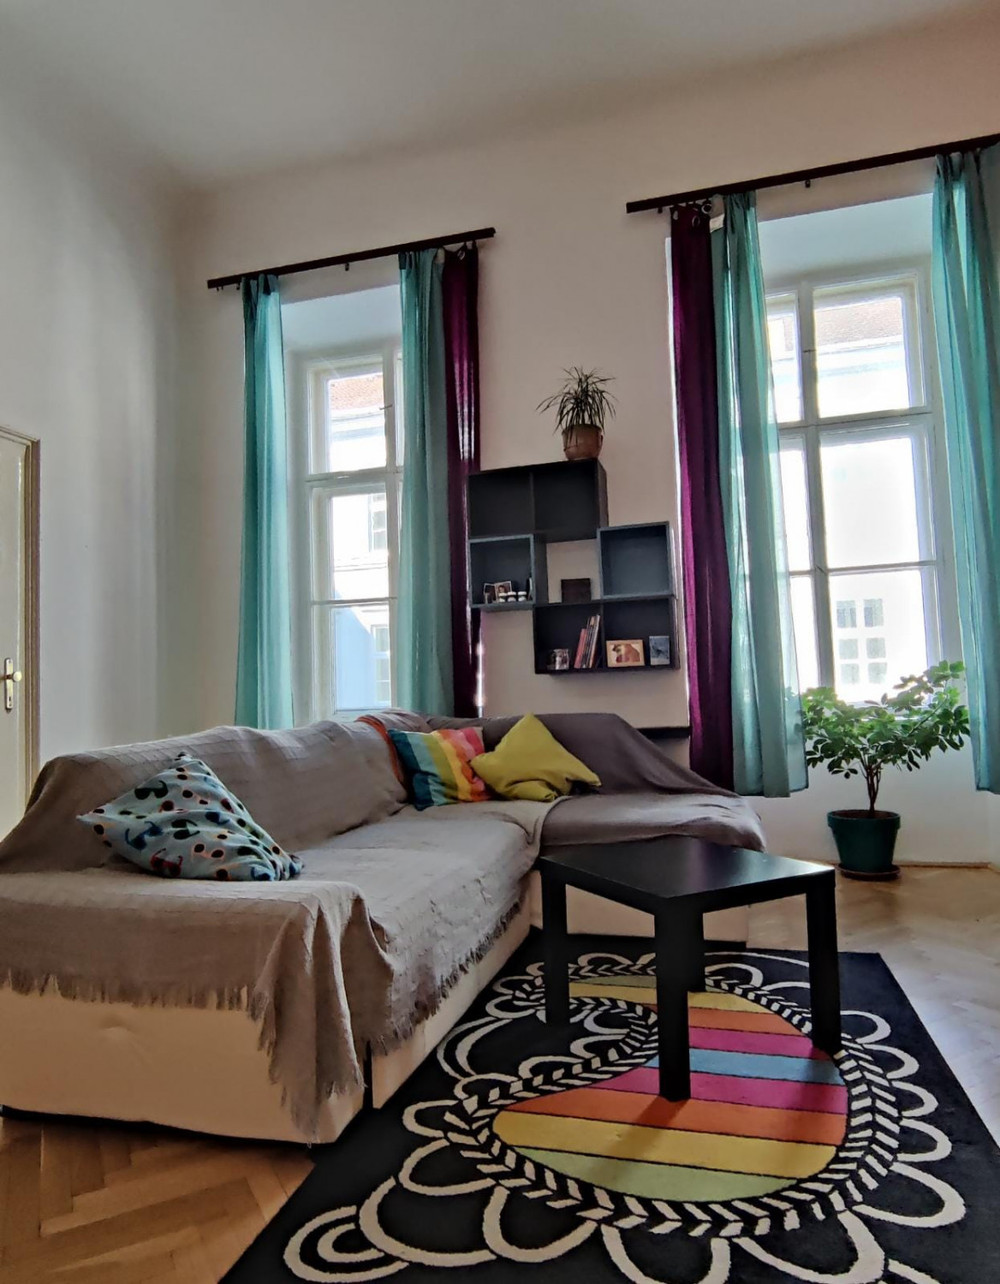 Artsy flat in the heart of Budapest